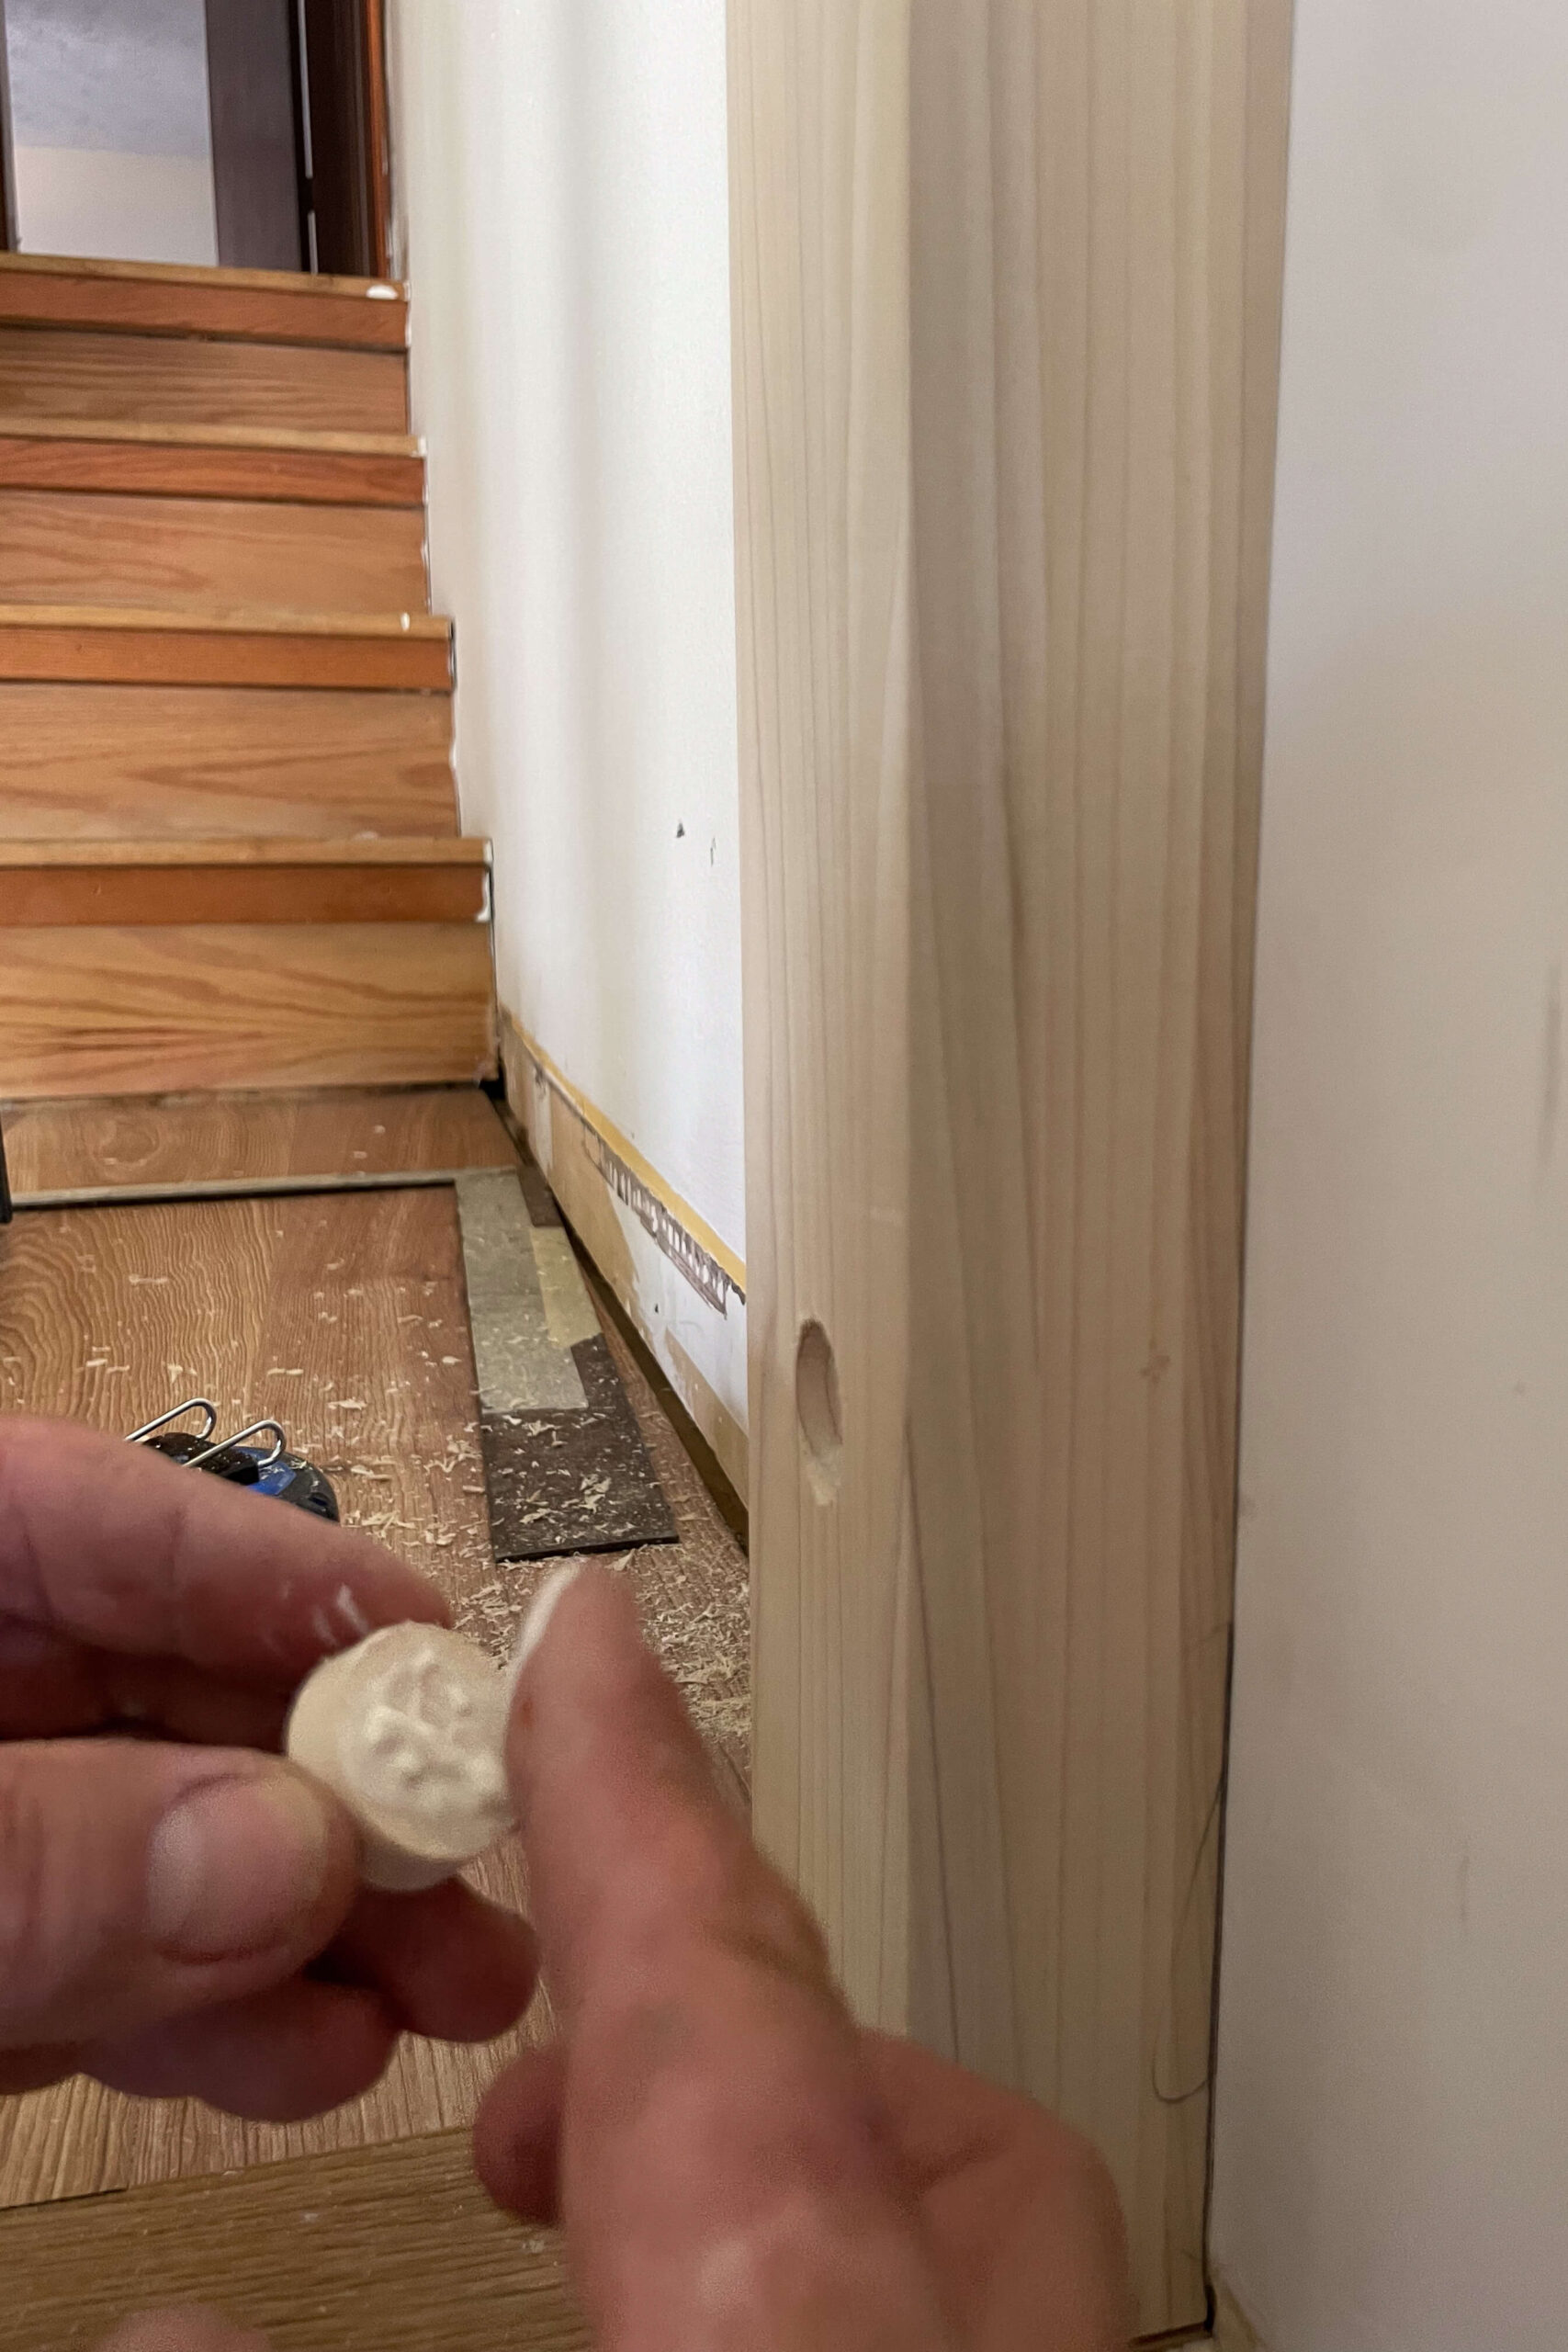 Filling in a hole from attaching a newel post to the wall with a lag bolt. 